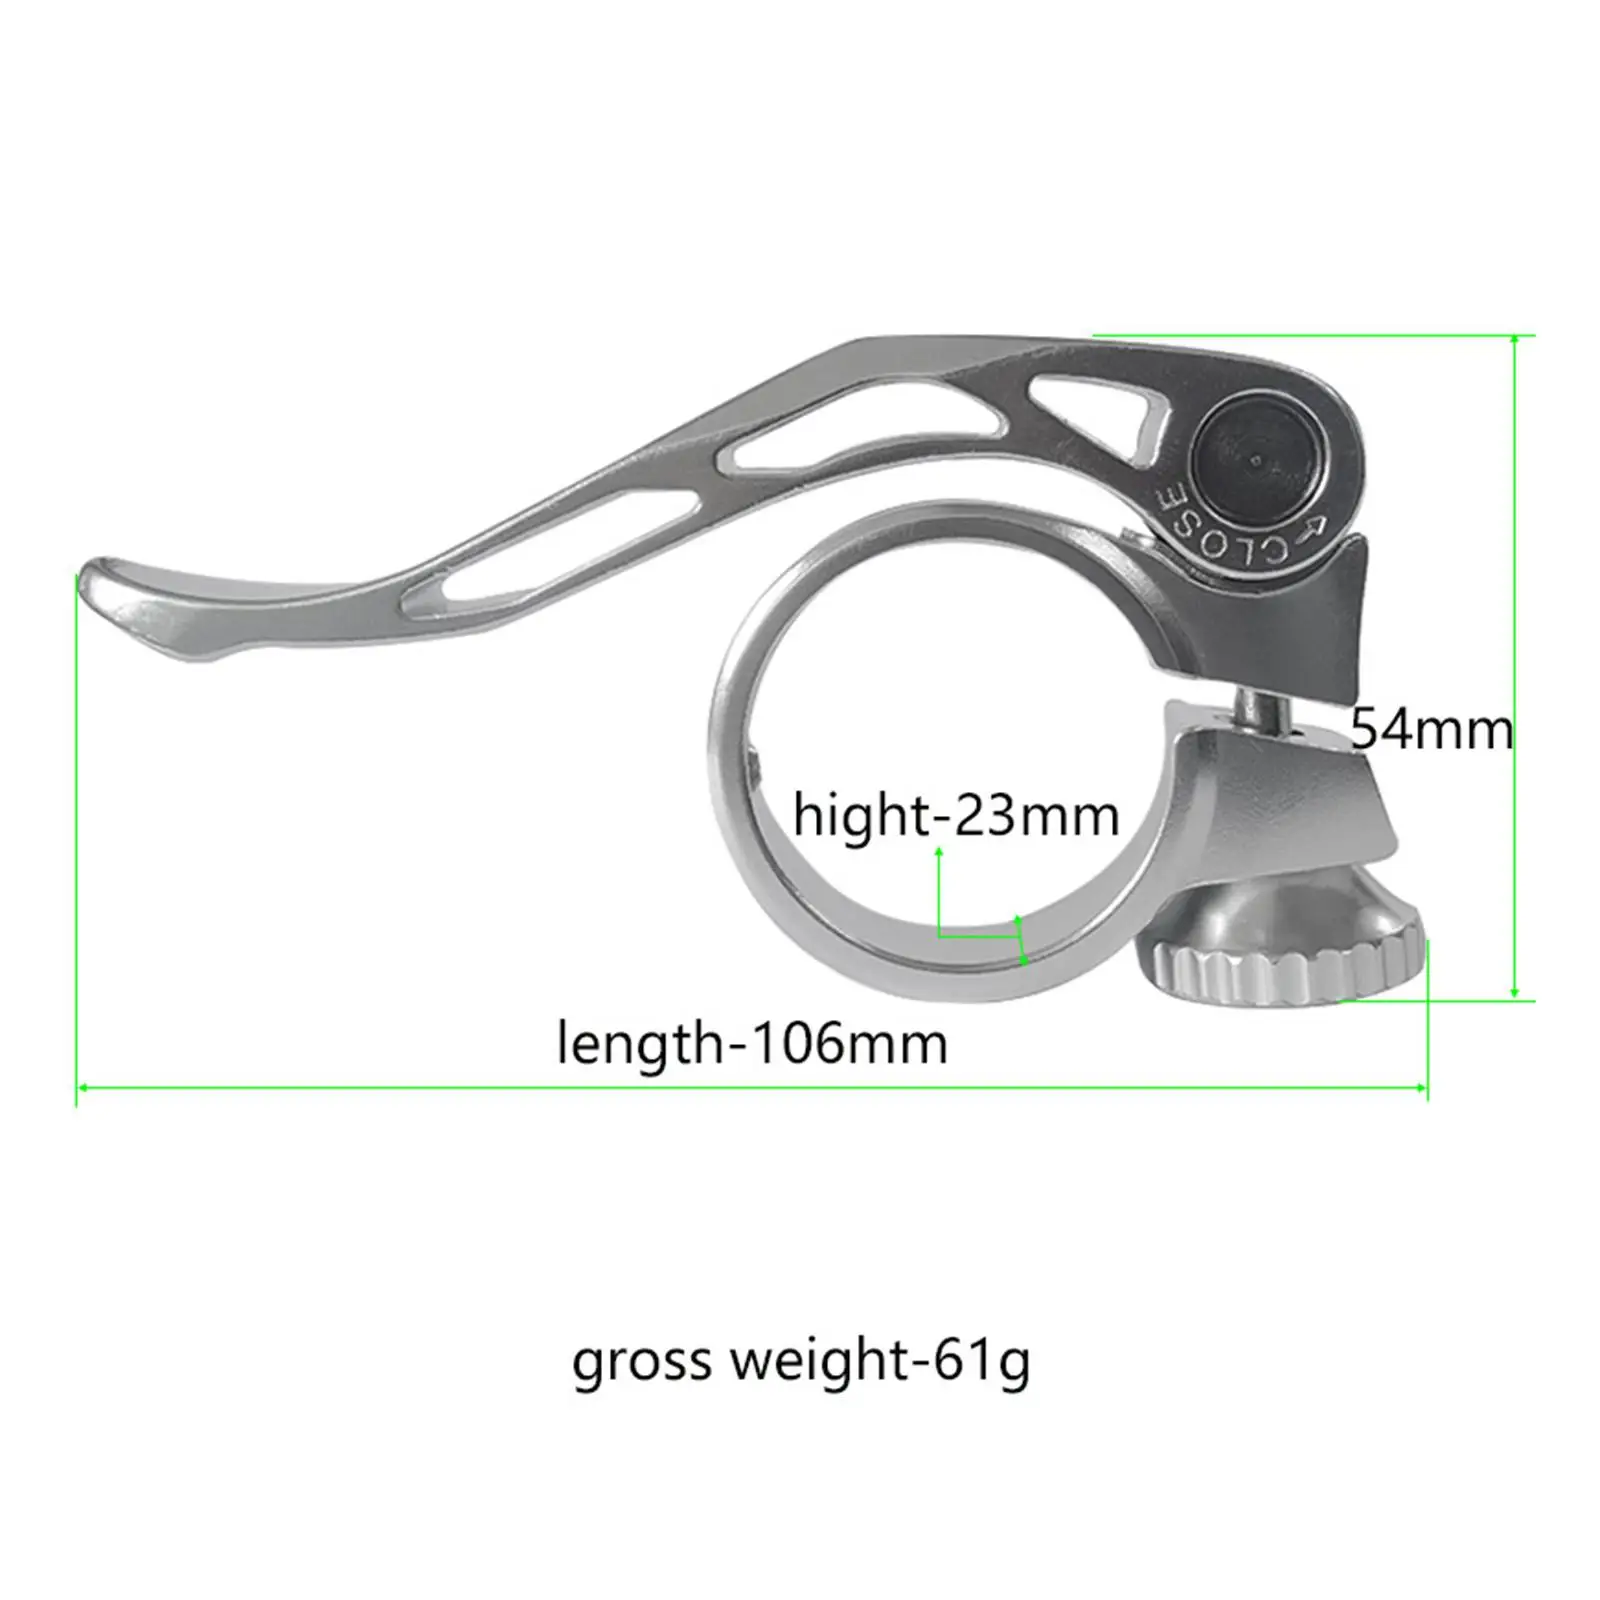 Bike Seat Post Clamp Bicycle Seatpost Clamp Road Bicycle Mount Parts Pole Clamps Brackets for Folding Bike